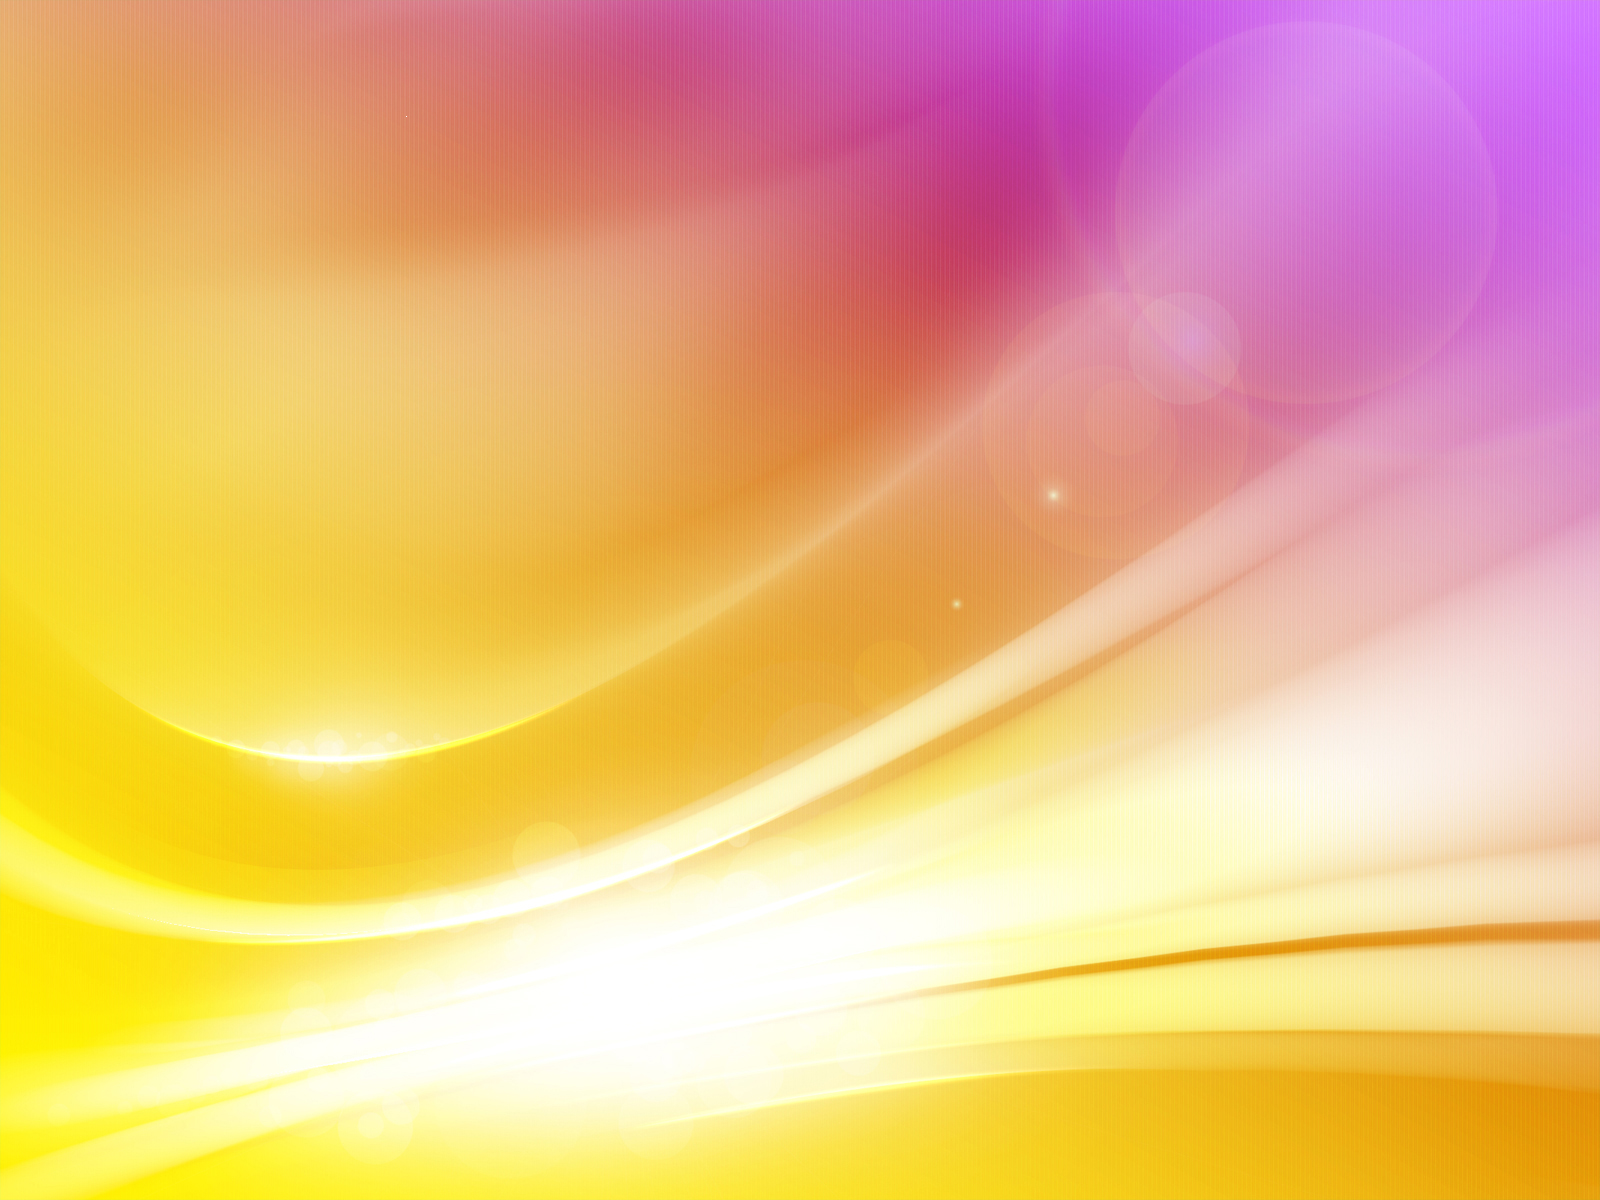 Amazing Yellow And Purple Colors HD Wallpaper Image For PC Computer